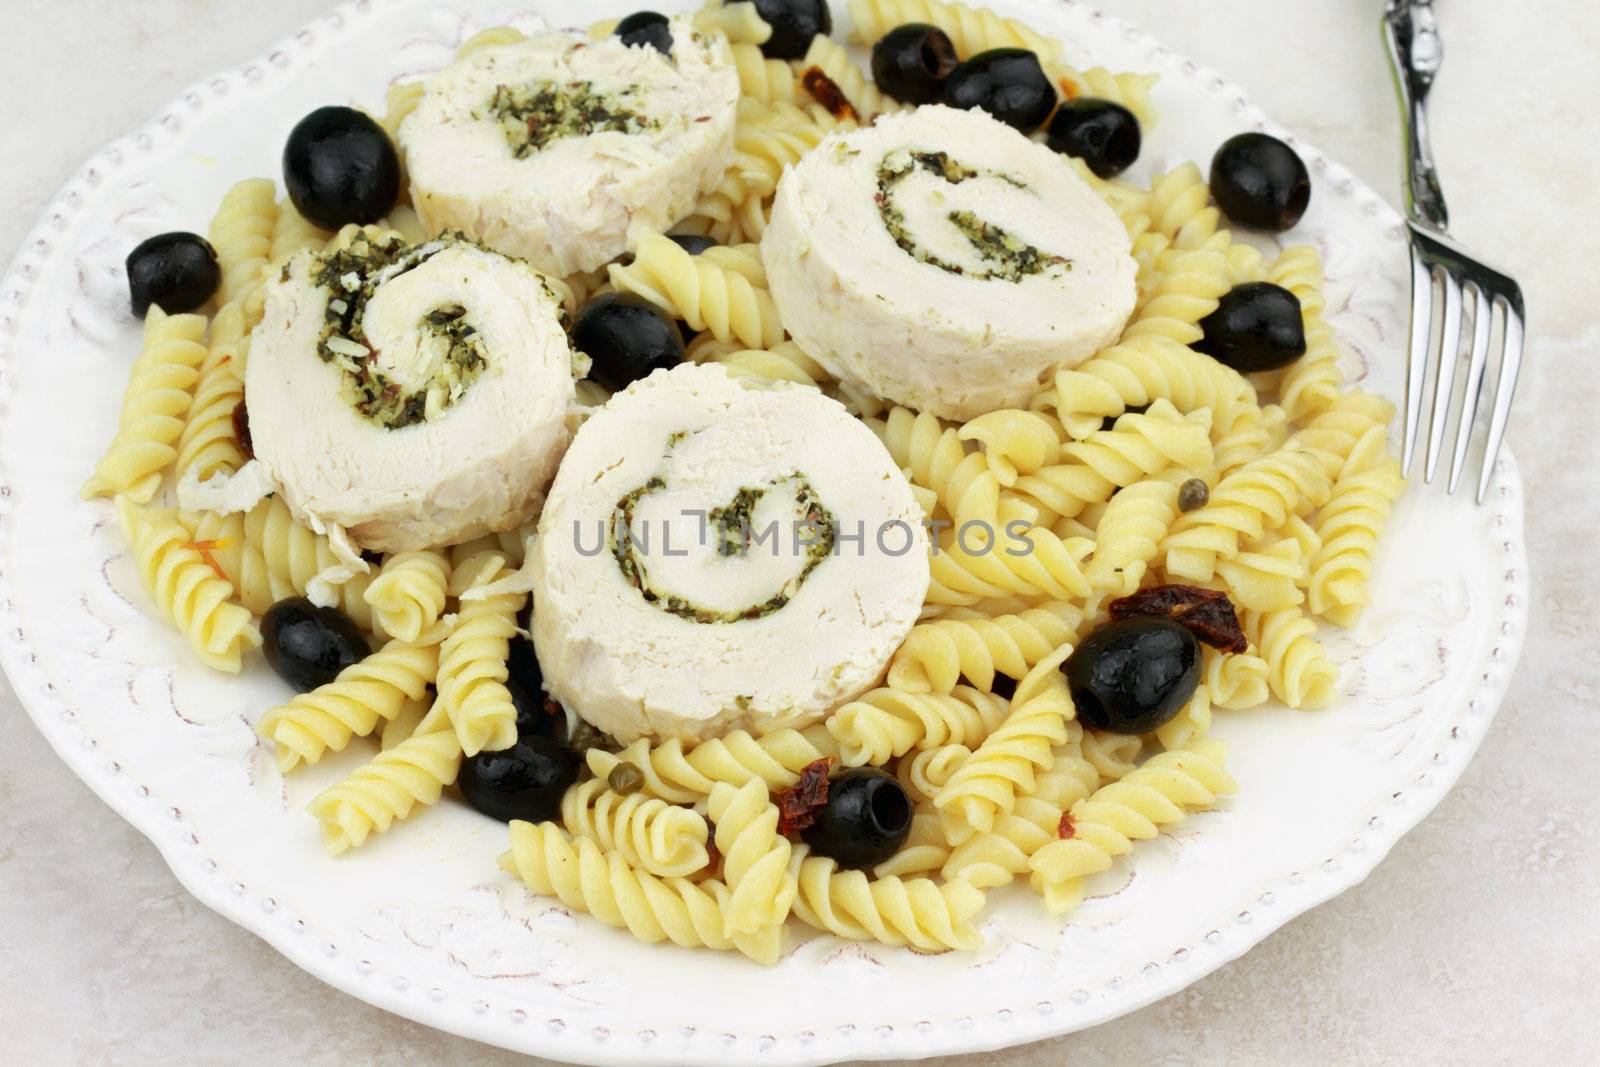 Steamed Chicken Roulade stuffed with fresh chopped basil leaves and nuts. Served over Italian rotini pasta with dried tomatoes and olives. 